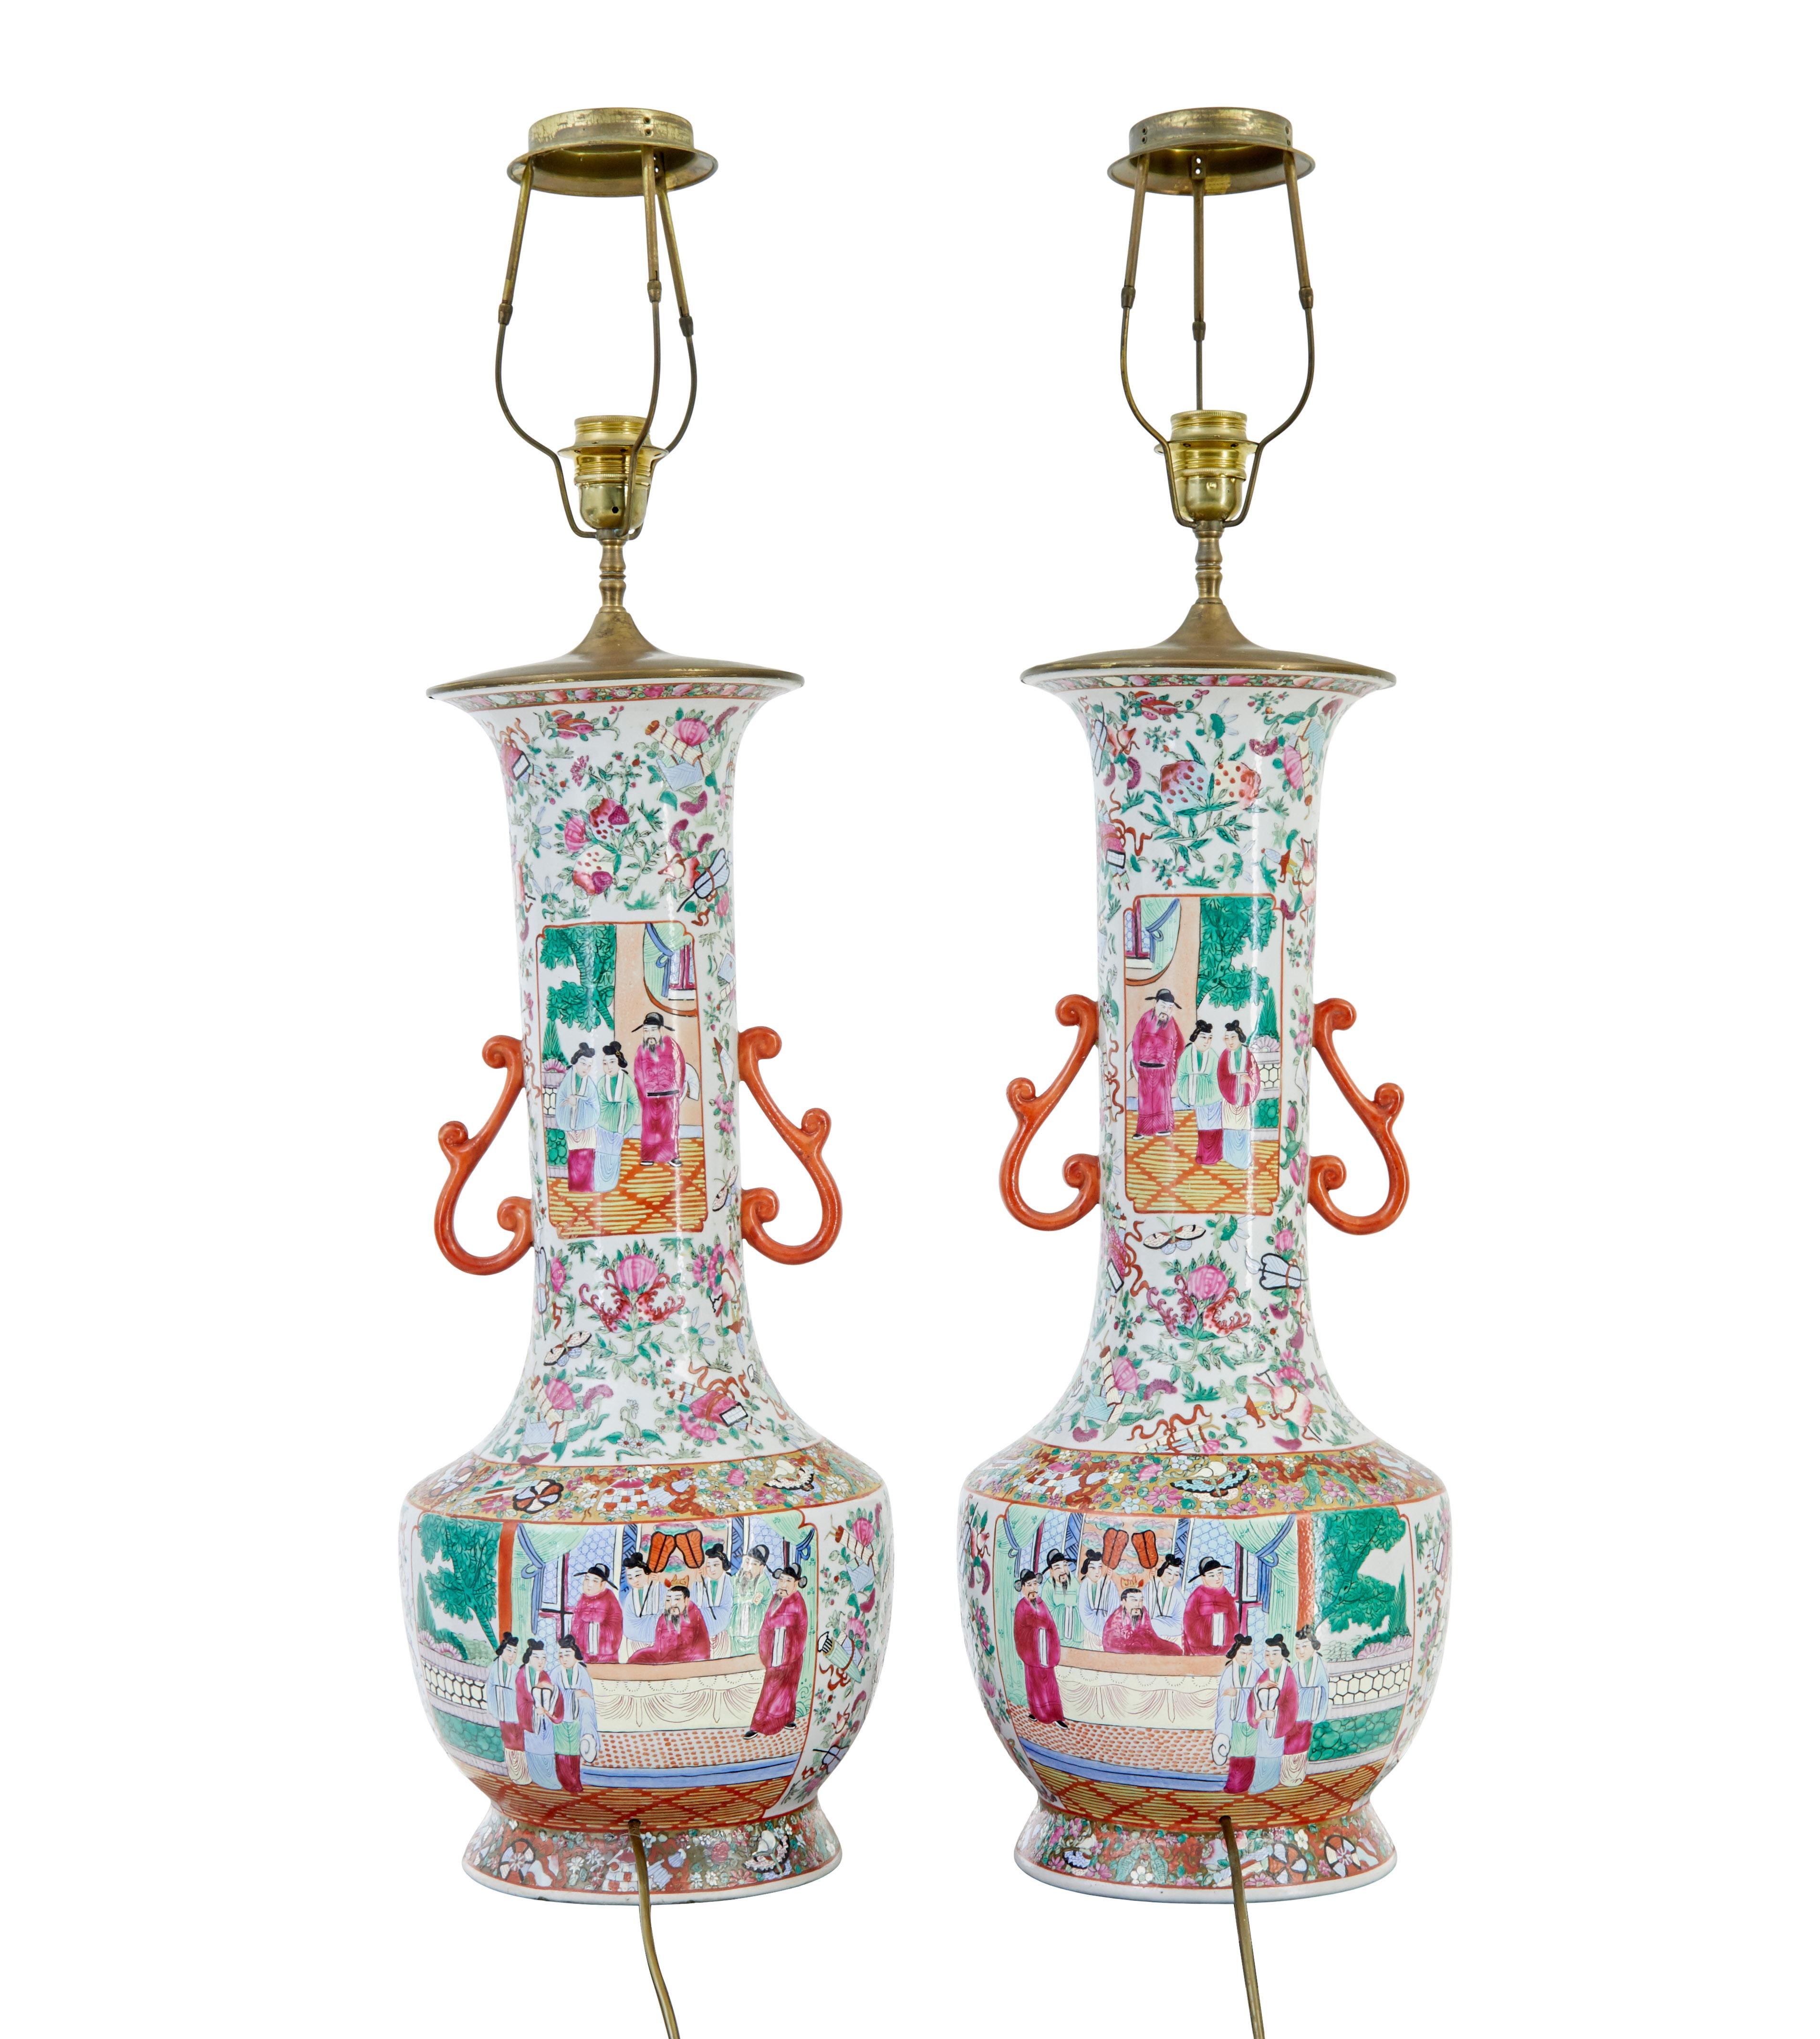 Pair of early 20th large Chinese Cantonese vase lamps circa 1910.

Beautifully hand painted in green, pink and orange on a white background. These are a left and right pair and have always been a pair.

Later converted sympathetically into a pair of